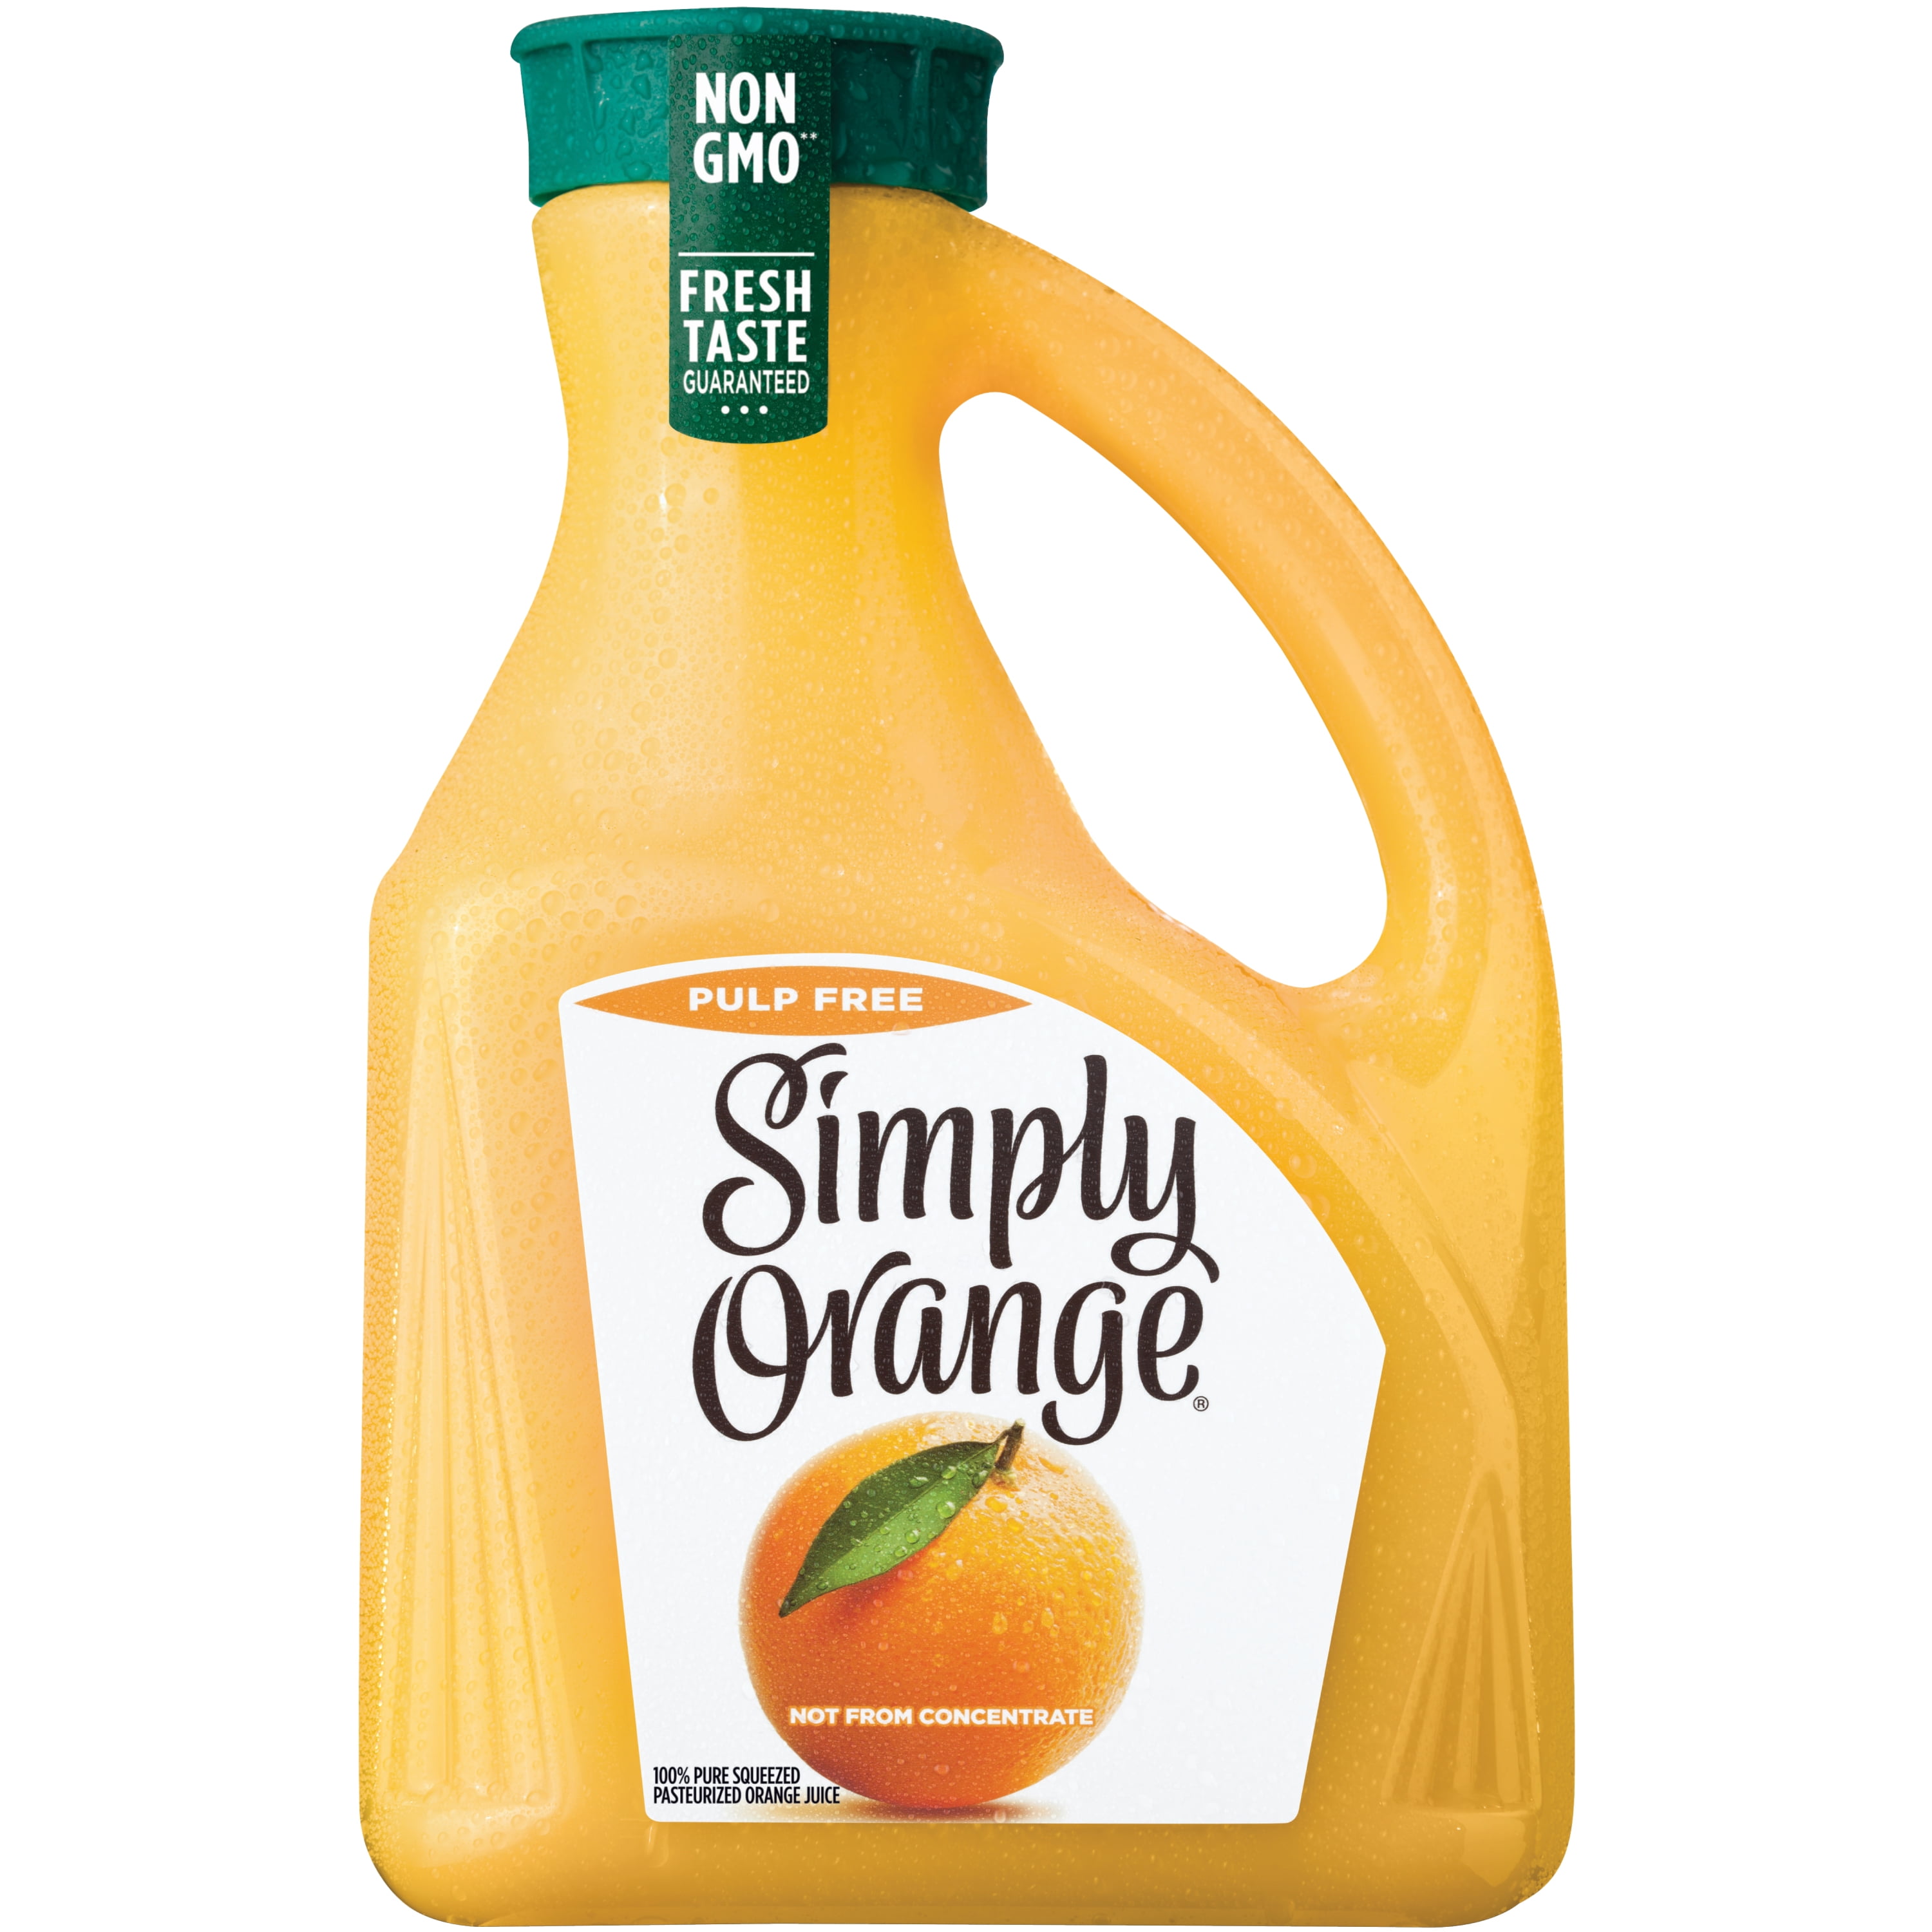 What is the sign for orange juice?